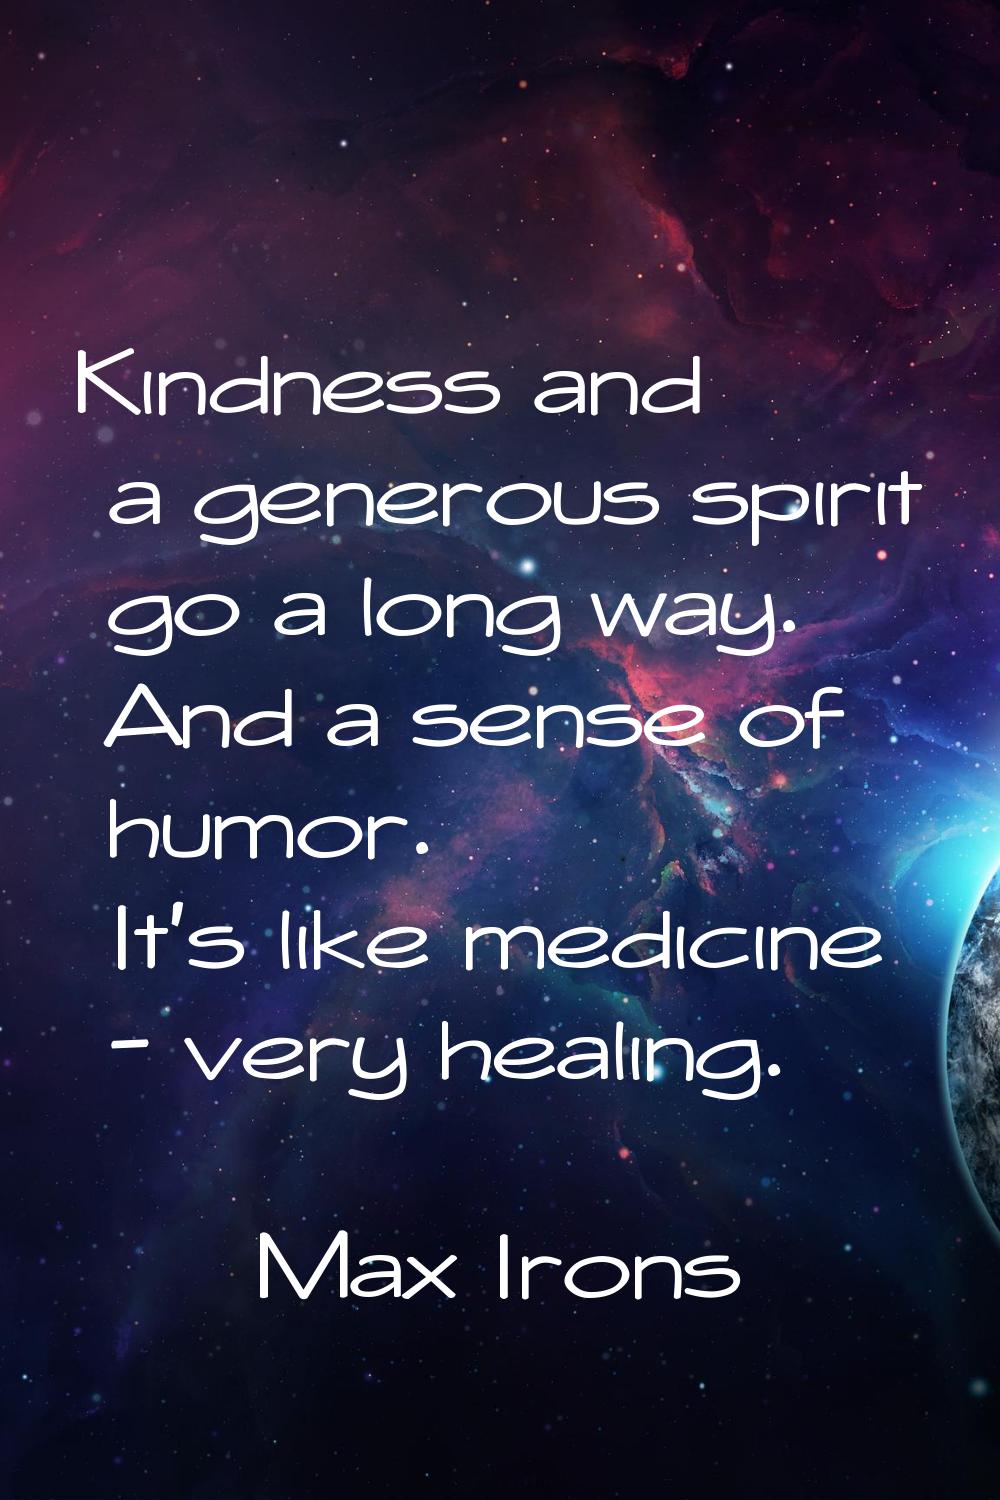 Kindness and a generous spirit go a long way. And a sense of humor. It's like medicine - very heali